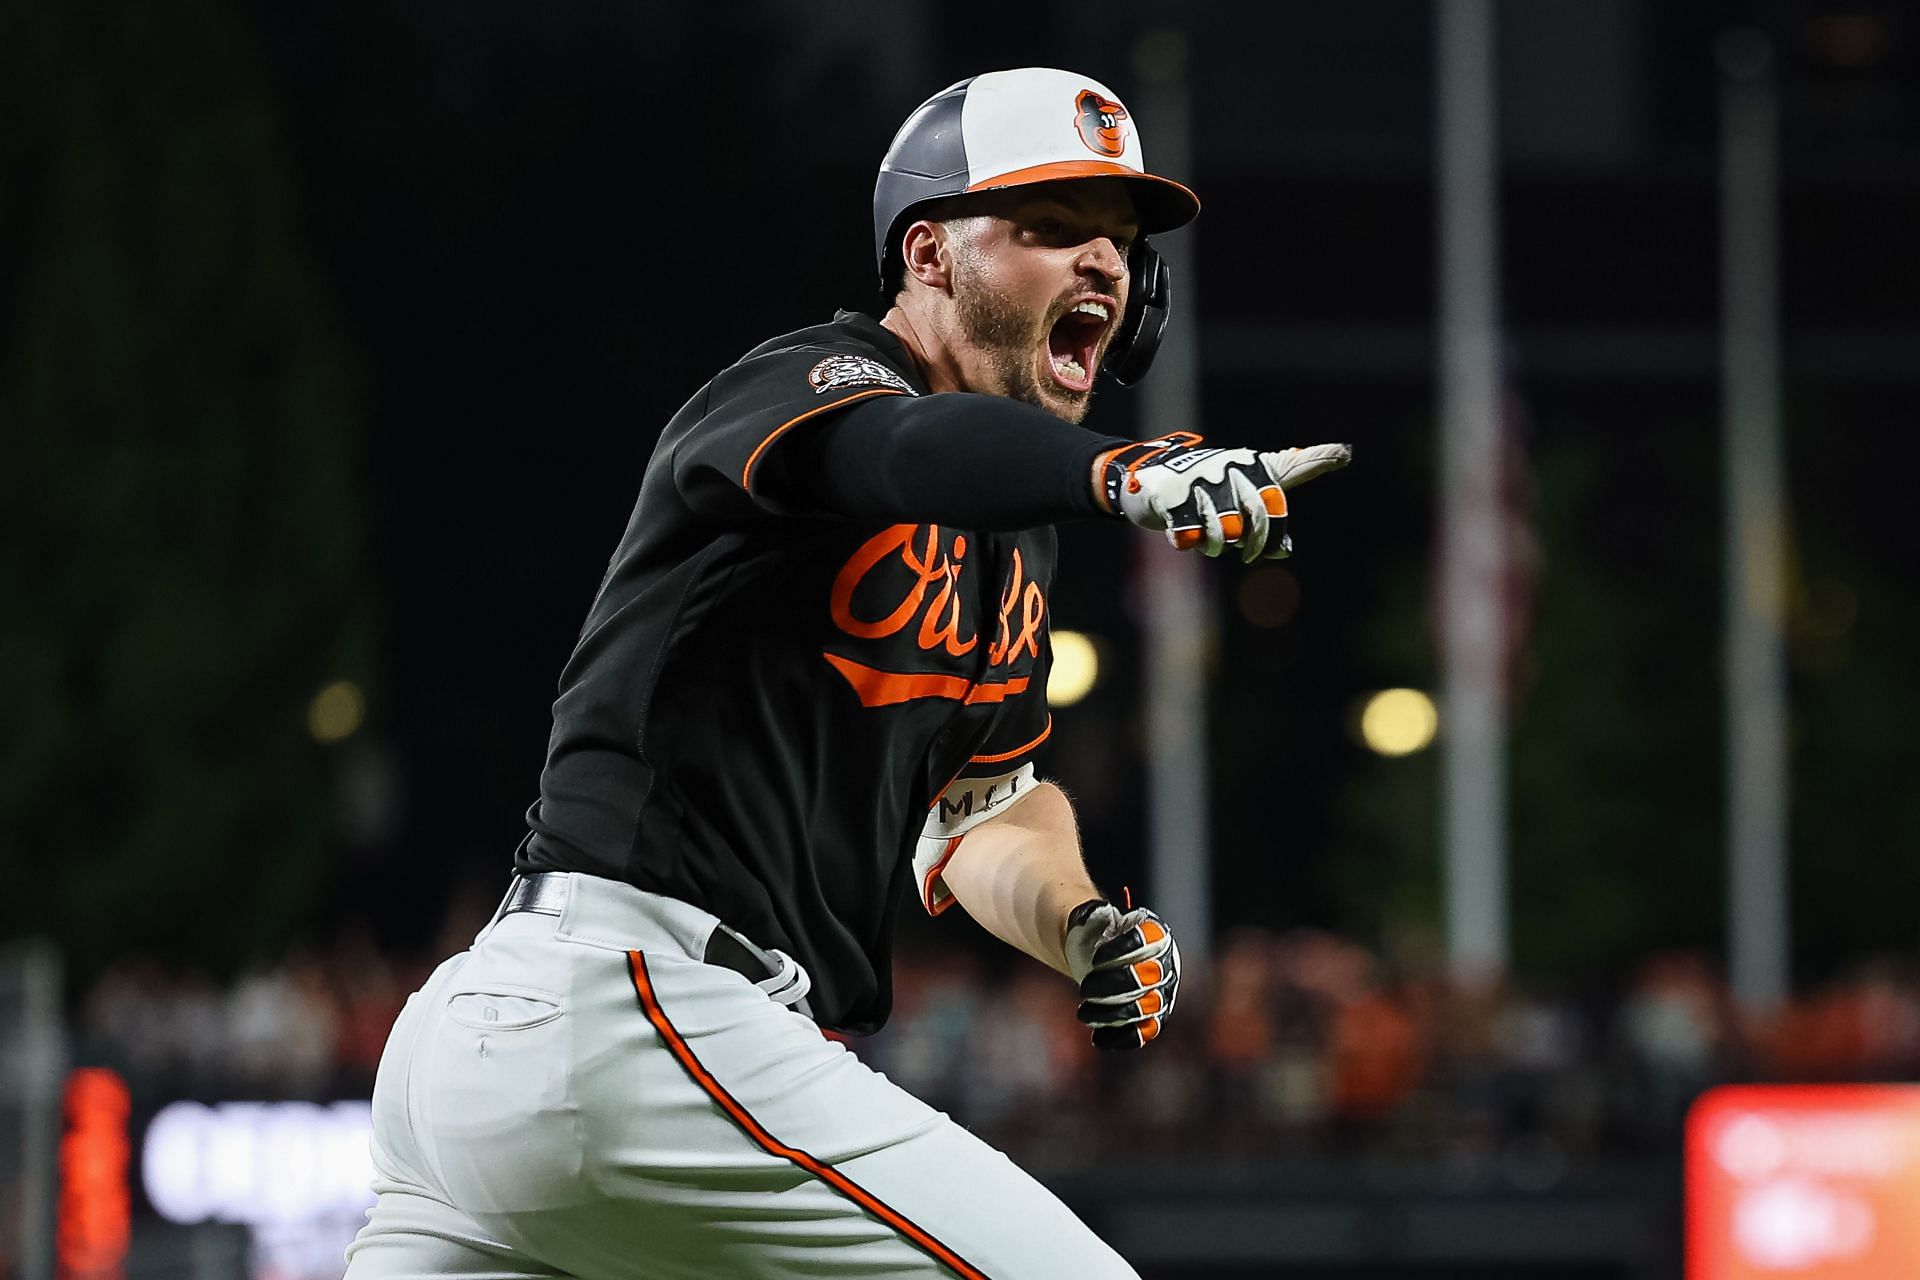 Orioles' Trey Mancini's family emotional after his return a year after